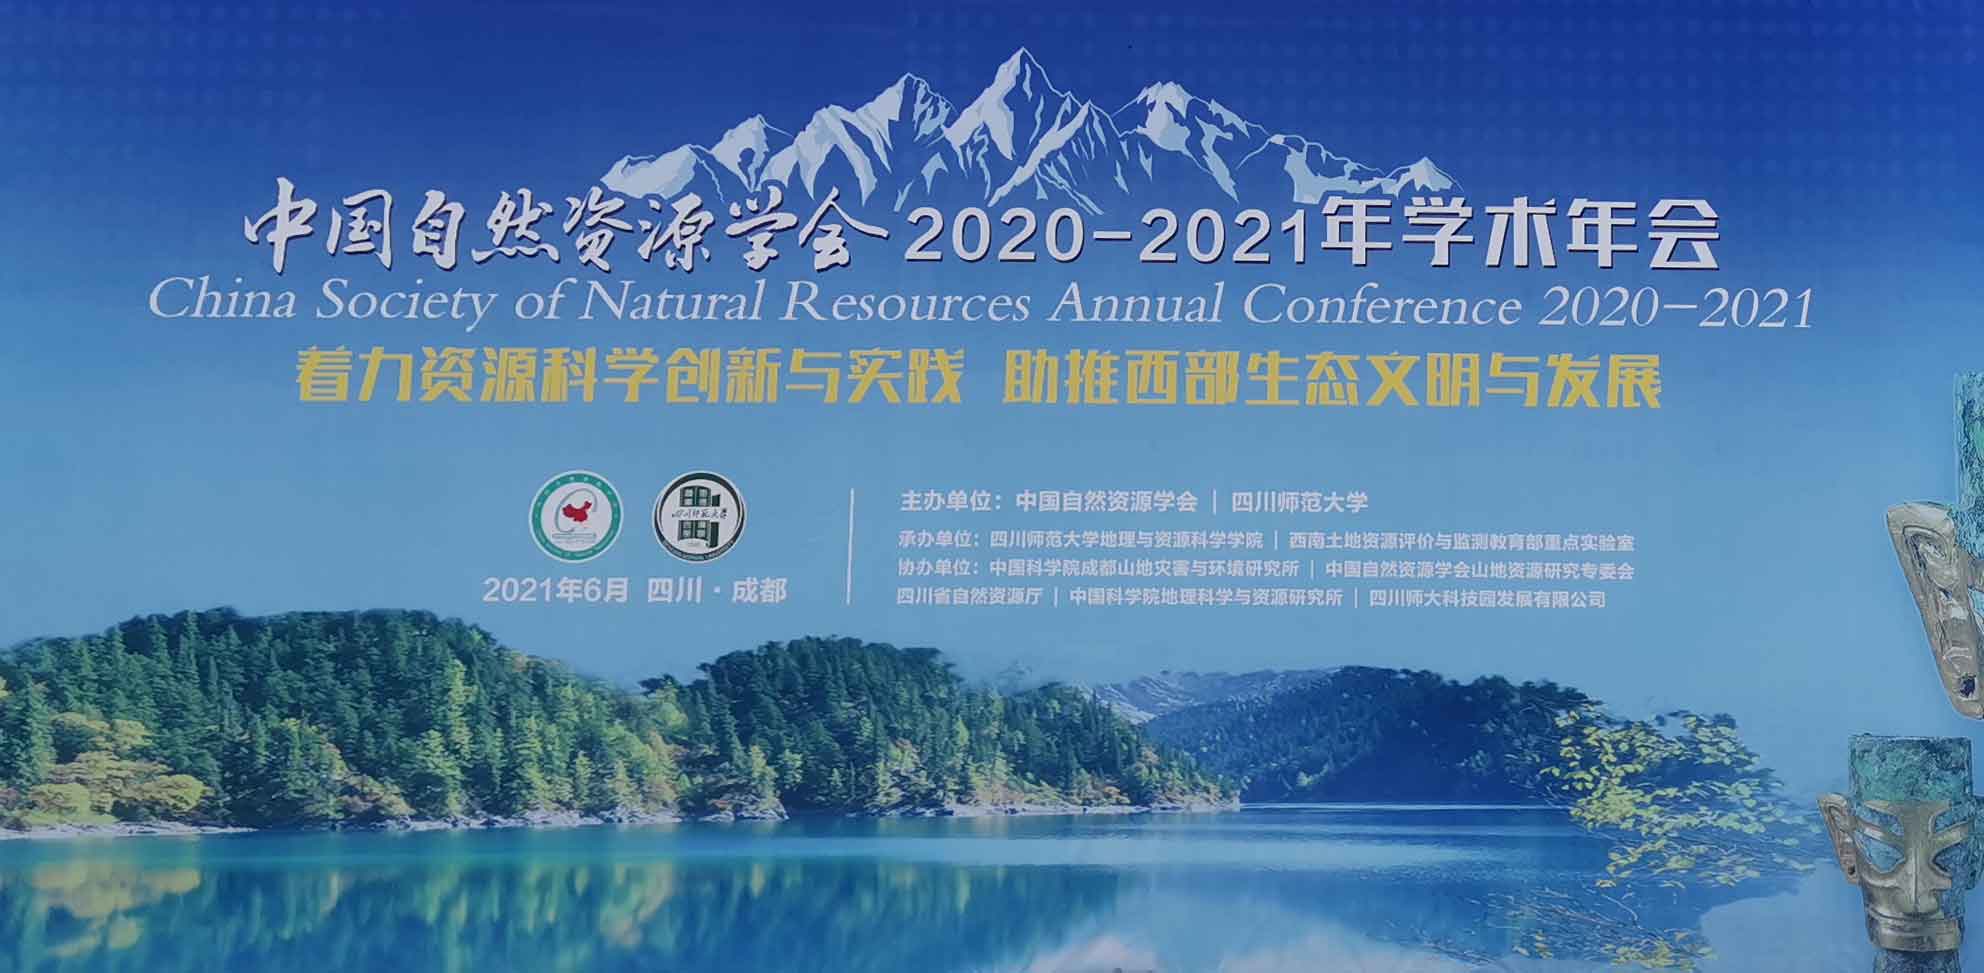 LICA attended Forest Resources Branch of China Natural Resources Society